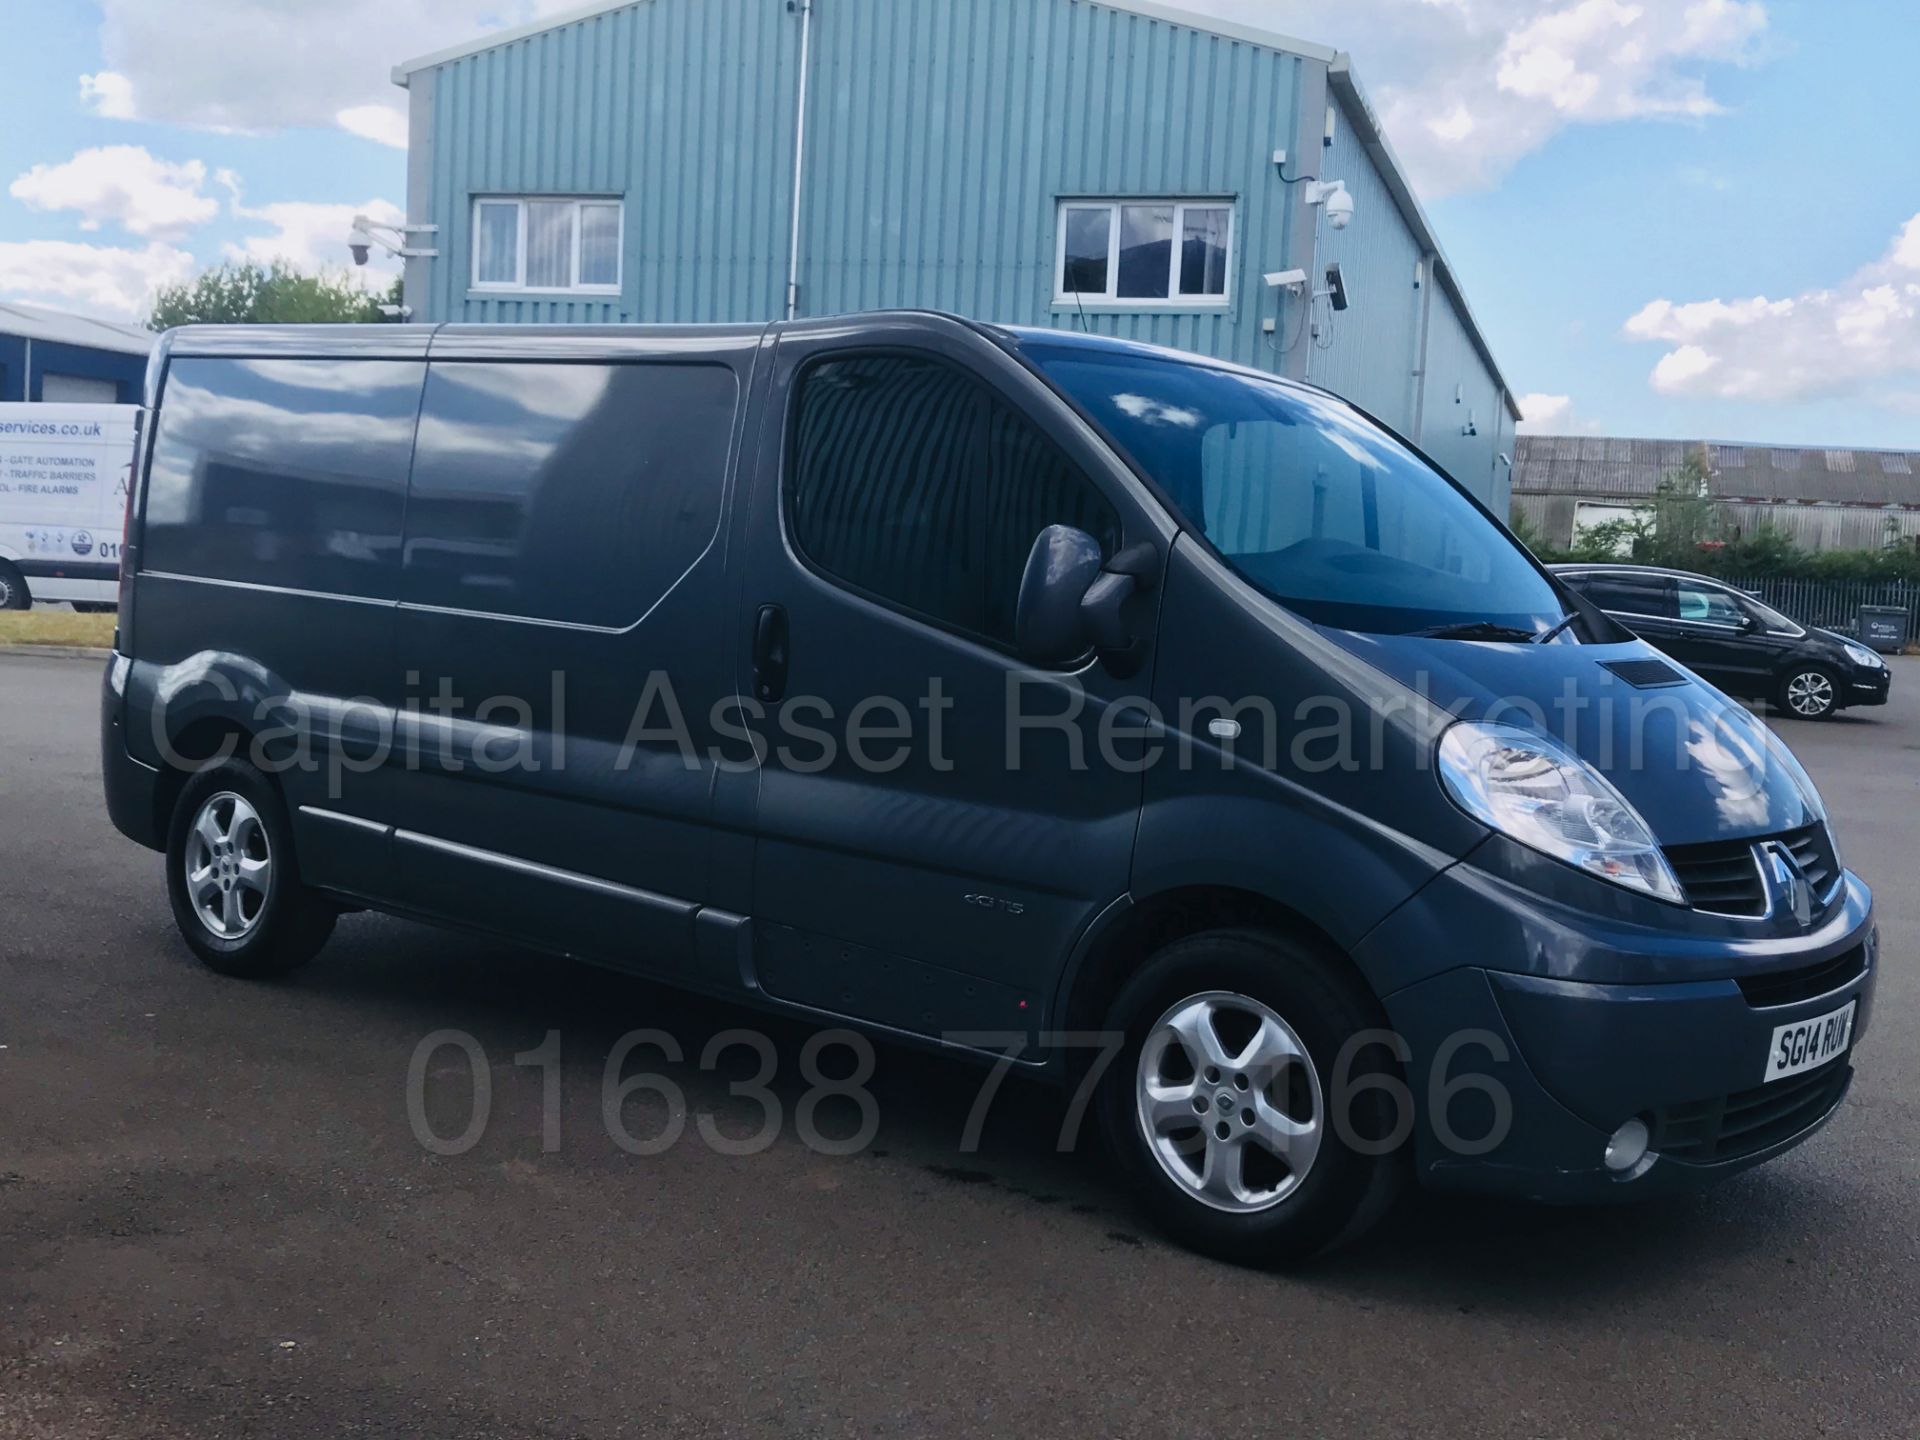 (On Sale) RENAULT TRAFIC 'SPORT EDITION' LWB (2014) '2.0 DCI - 115 BHP - 6 SPEED' *AIR CON* (NO VAT) - Image 10 of 40